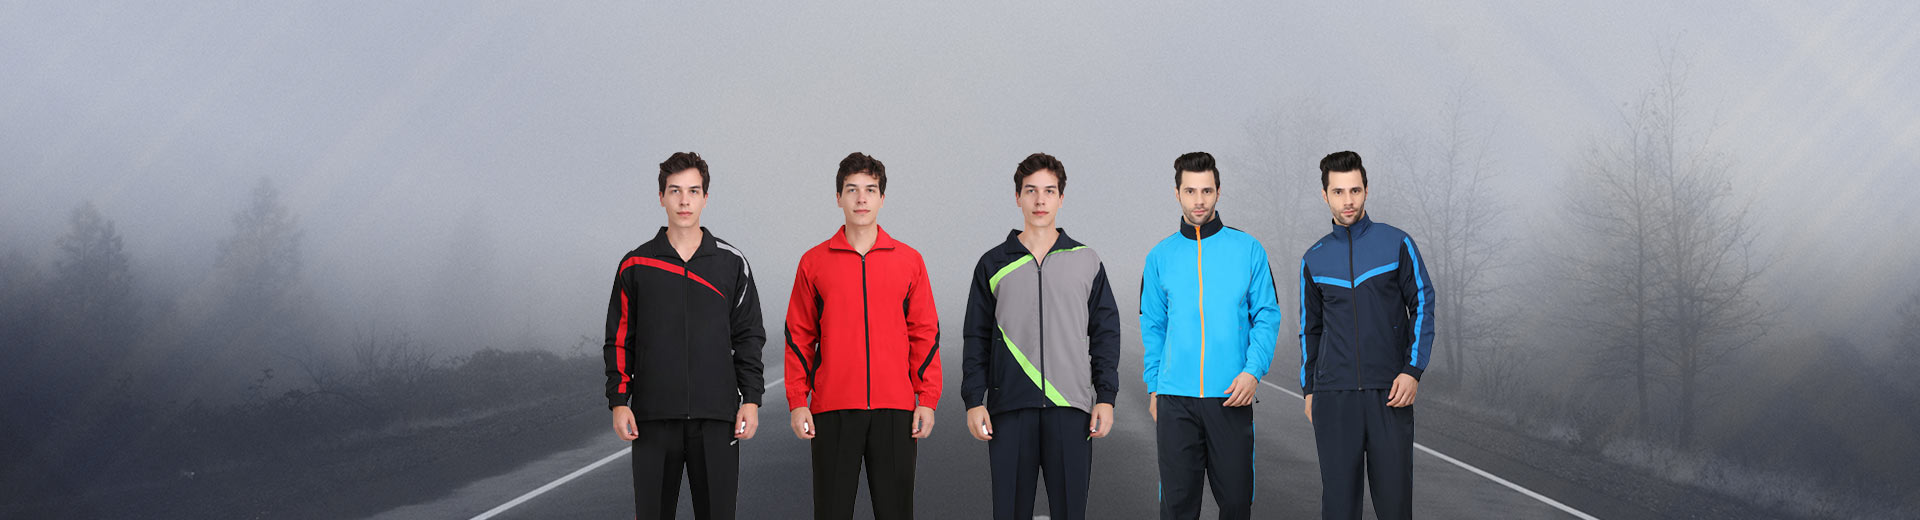 Tracksuits Manufacturers in Hamburg